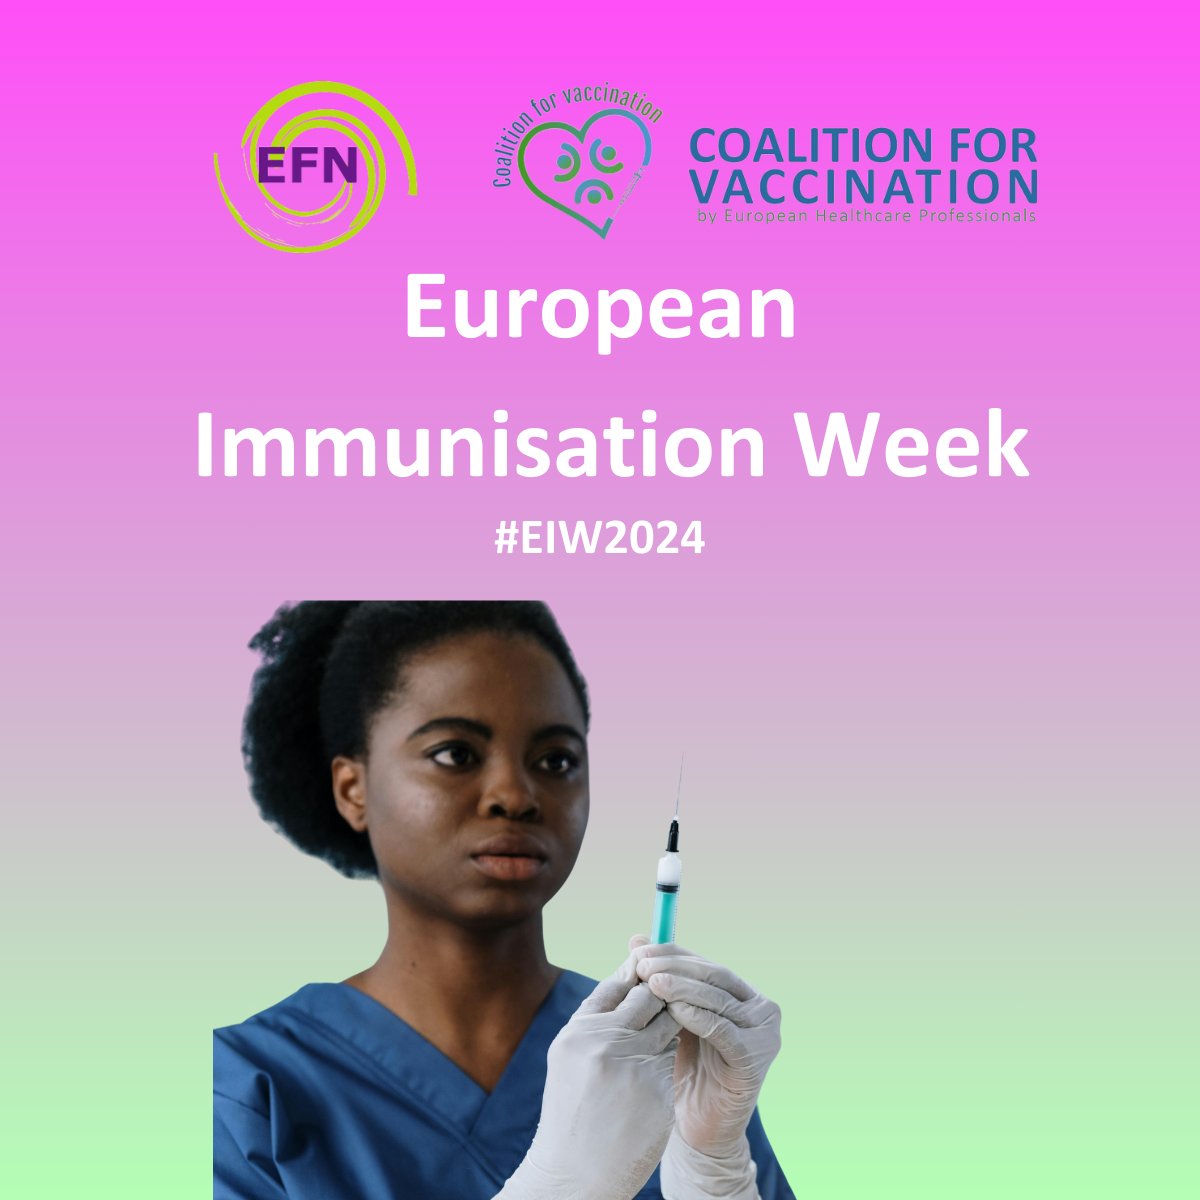 Despite evidence, vaccination remains a controversial issue. For the #EIW2024 we want to celebrate the contribution of nurses to European and Global health. #EFN #EIW2024 #GetVaccinated #Nursesforvaccination #Nurses #Prevention #Longlifeforall #EPI #Vaccinesforall #vaccination